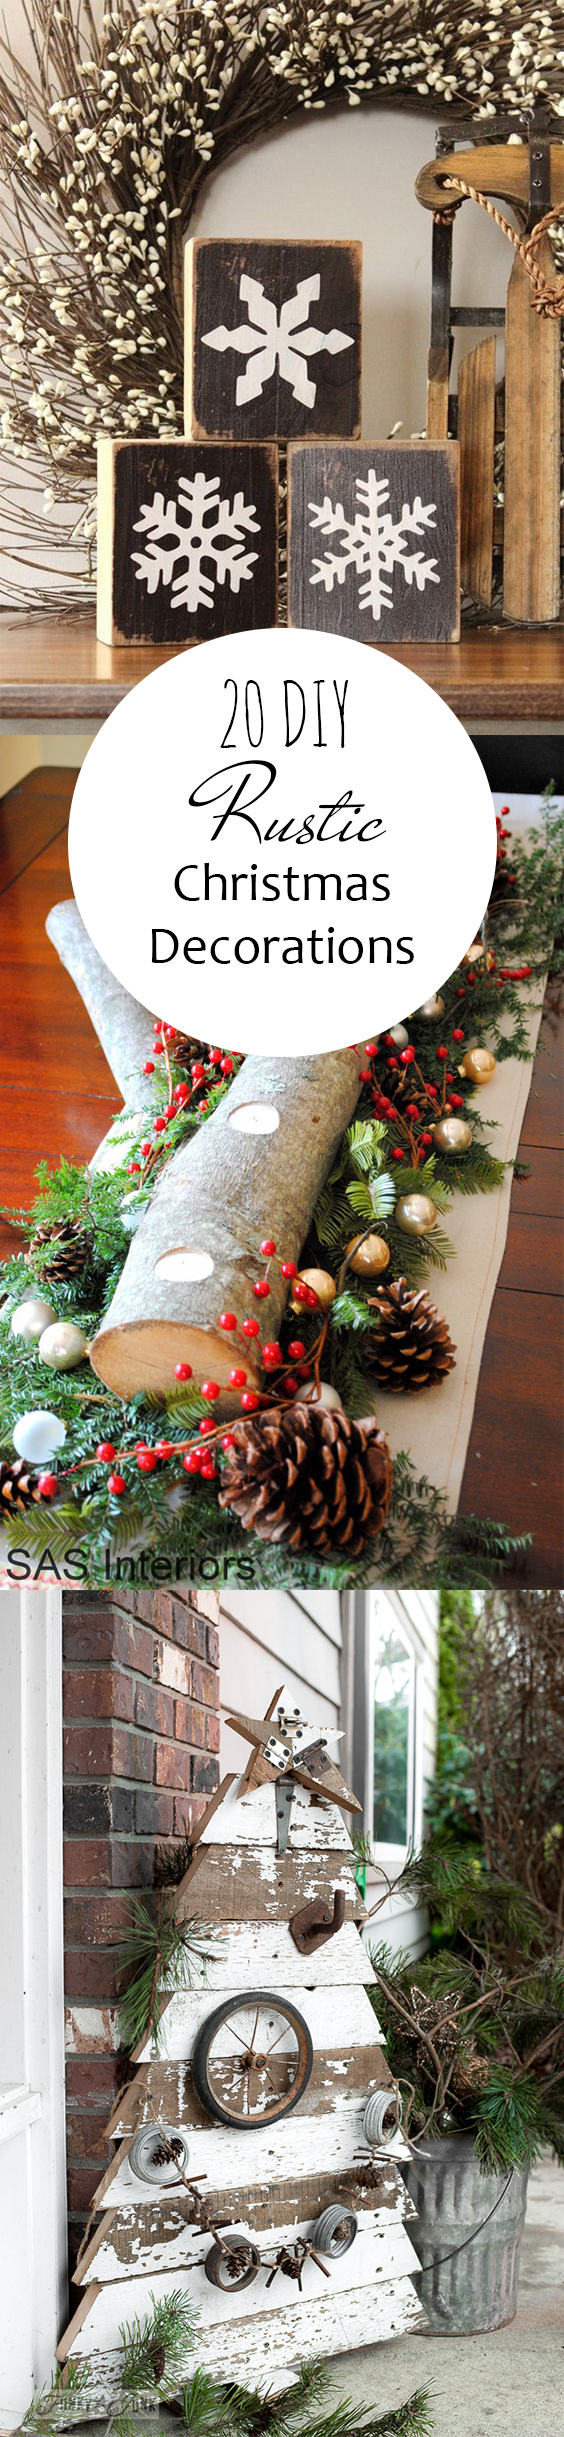 20 DIY Rustic Christmas Decorations – Page 22 of 22 – Pickled Barrel